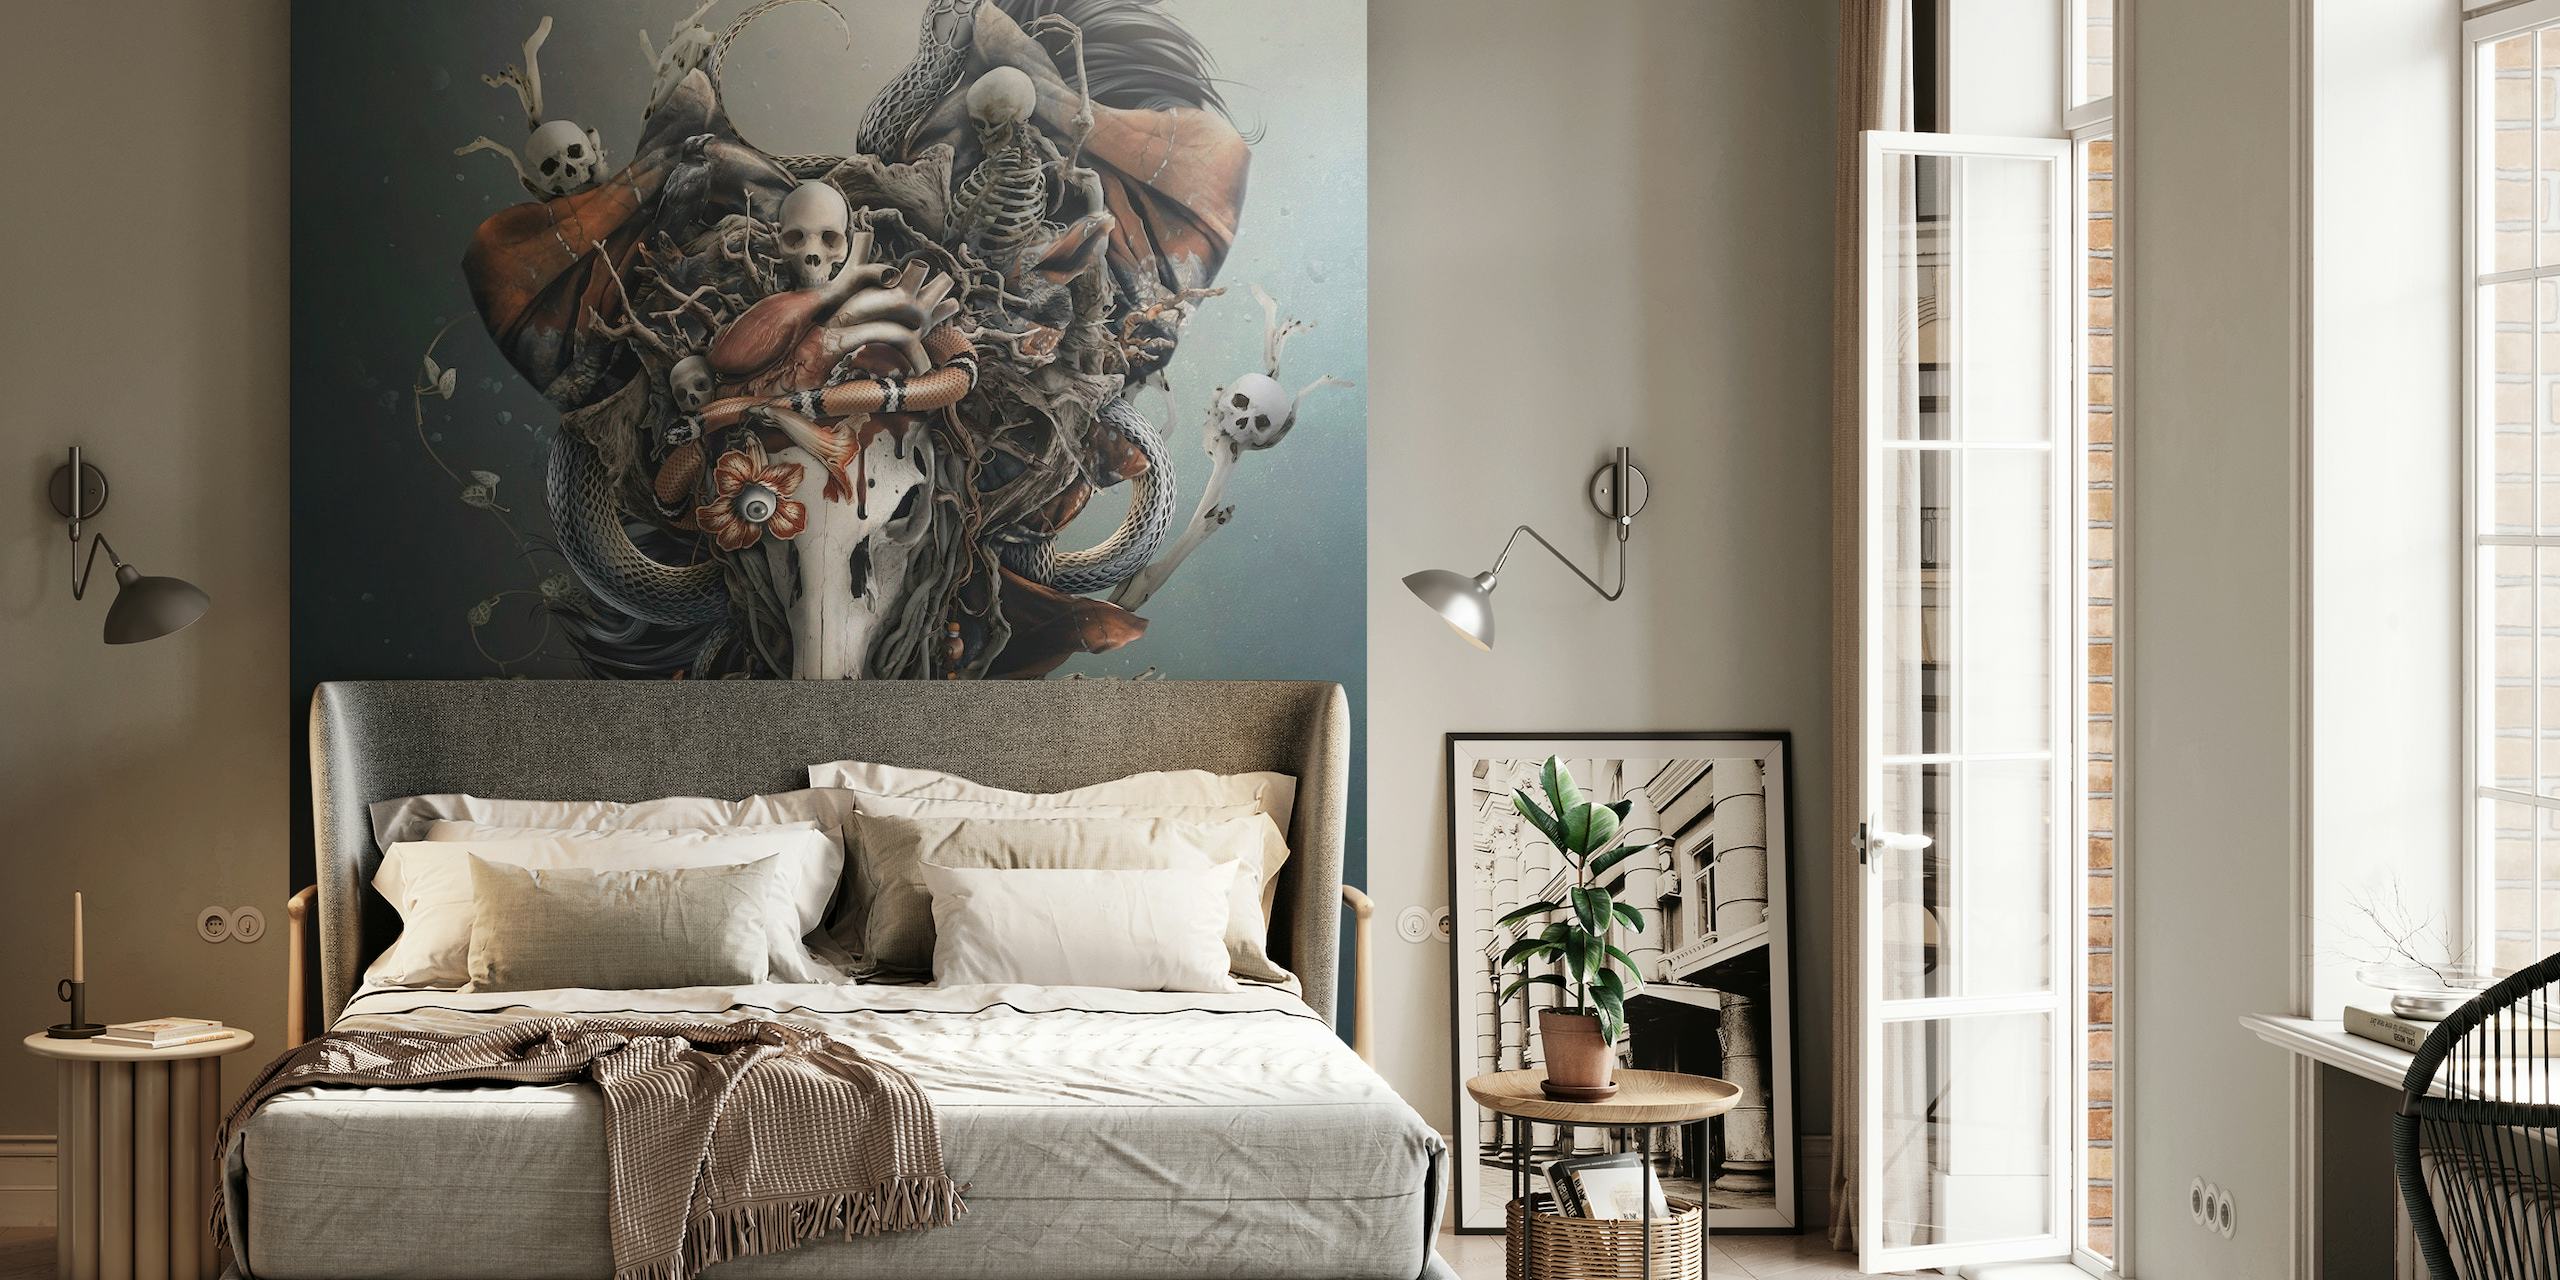 Mystical deer skull wall mural with flowers and feathers